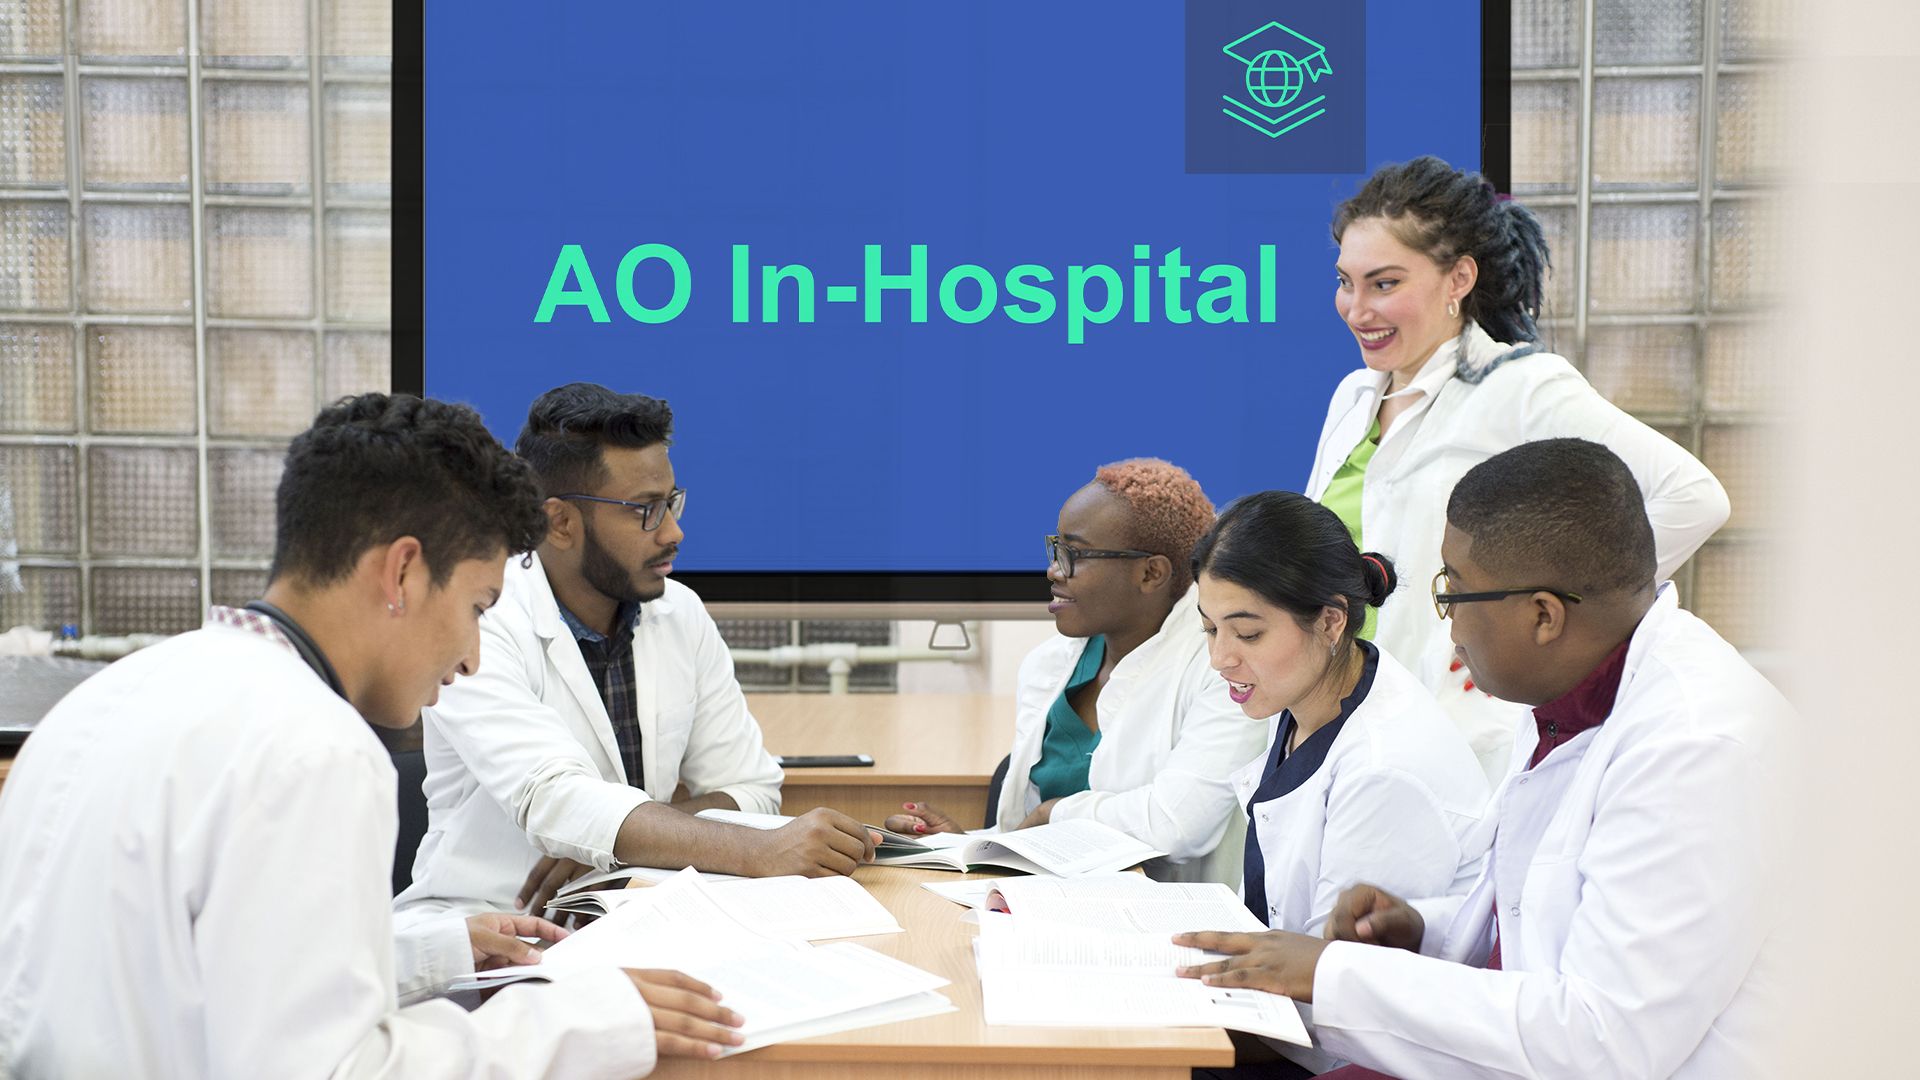 AO In-Hospital widens offerings with new ‘Limb salvage versus amputation’ module